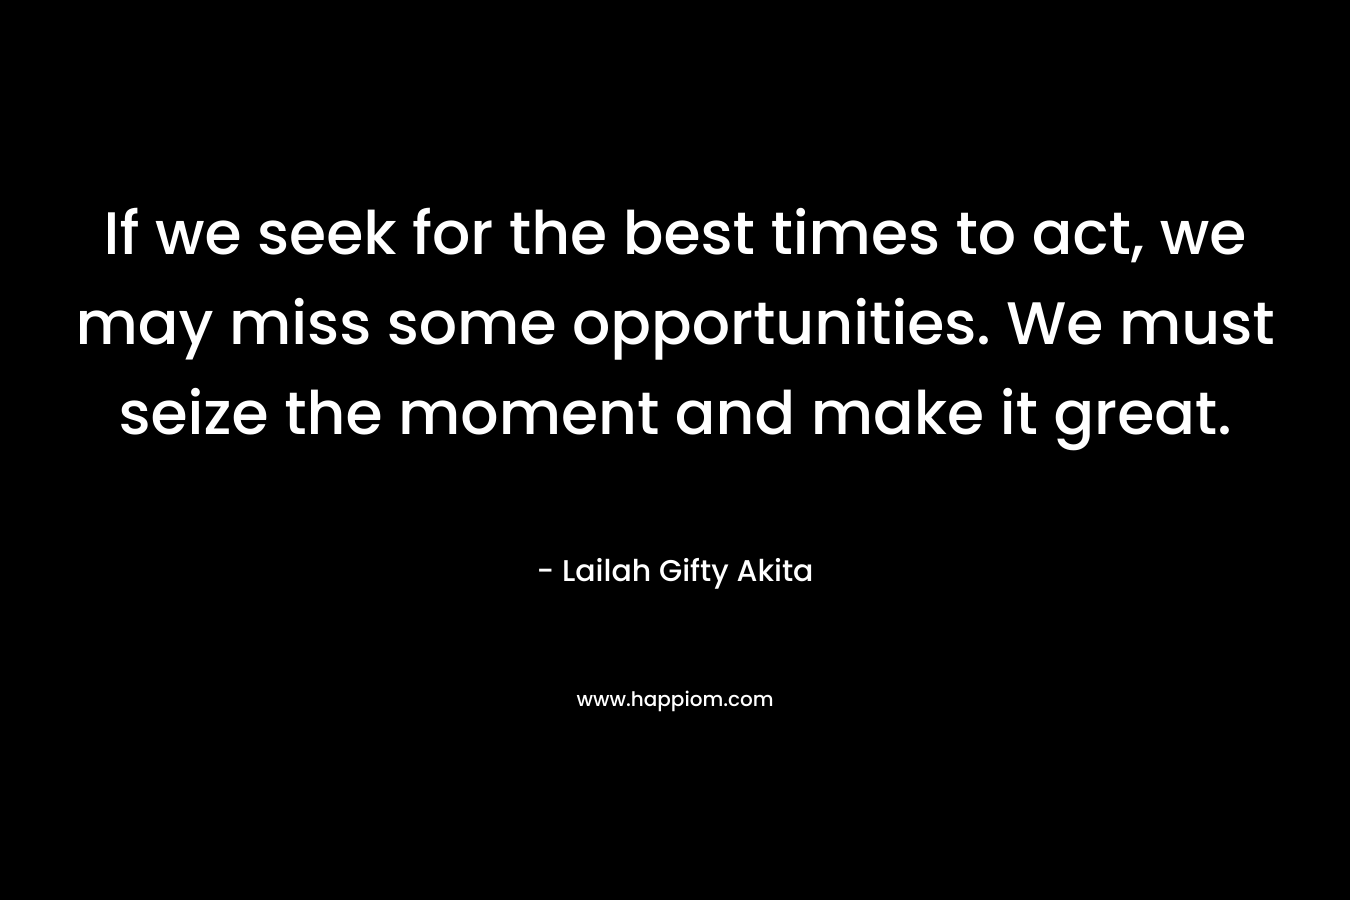 If we seek for the best times to act, we may miss some opportunities. We must seize the moment and make it great.